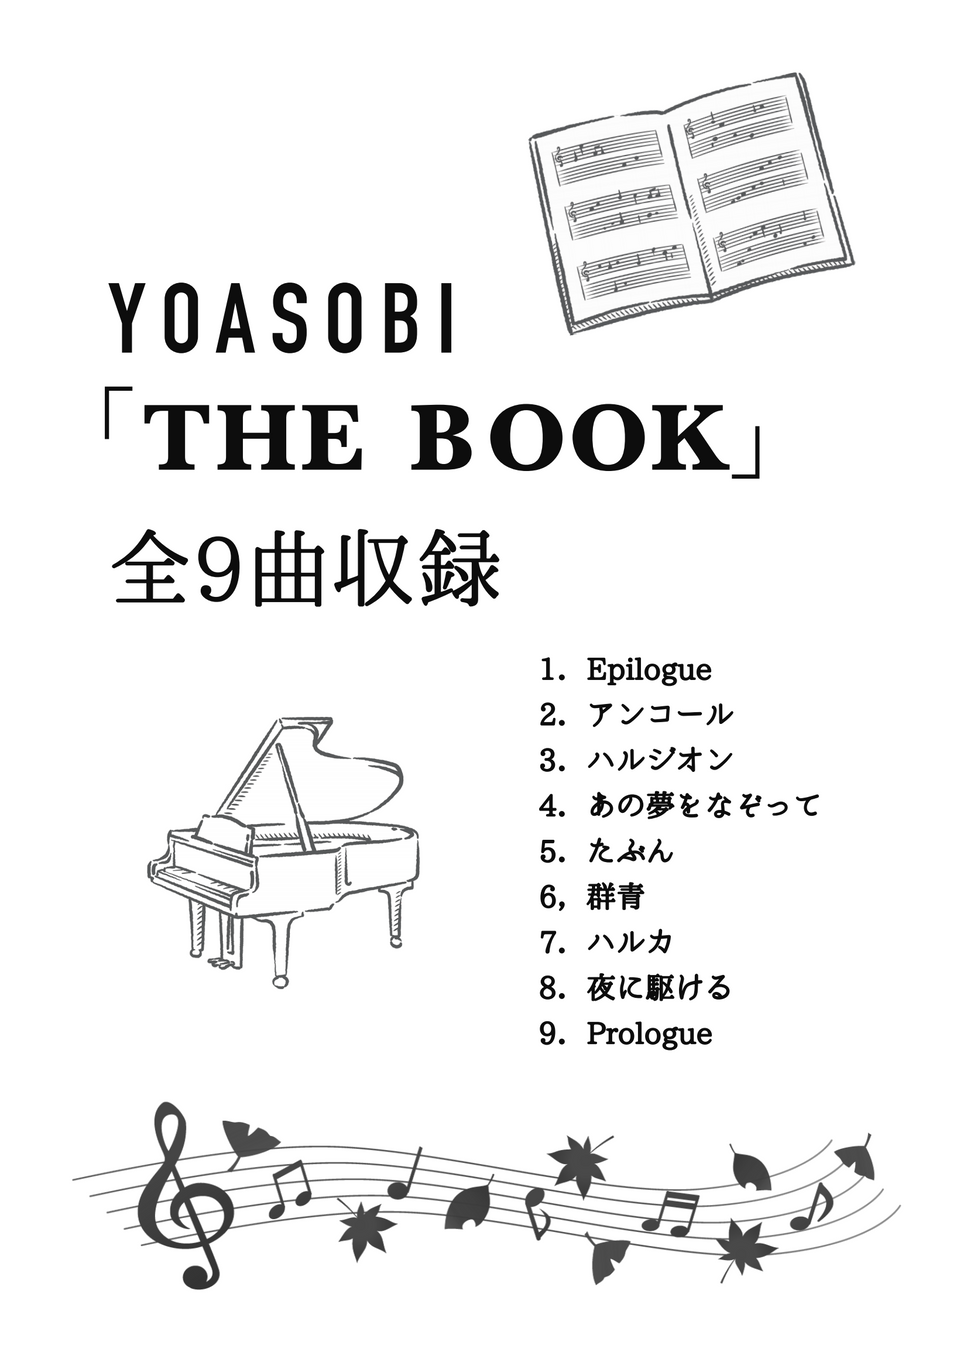 YOASOBI - 『THE BOOK』全曲集 (全9曲) by めいぷるの趣味部屋